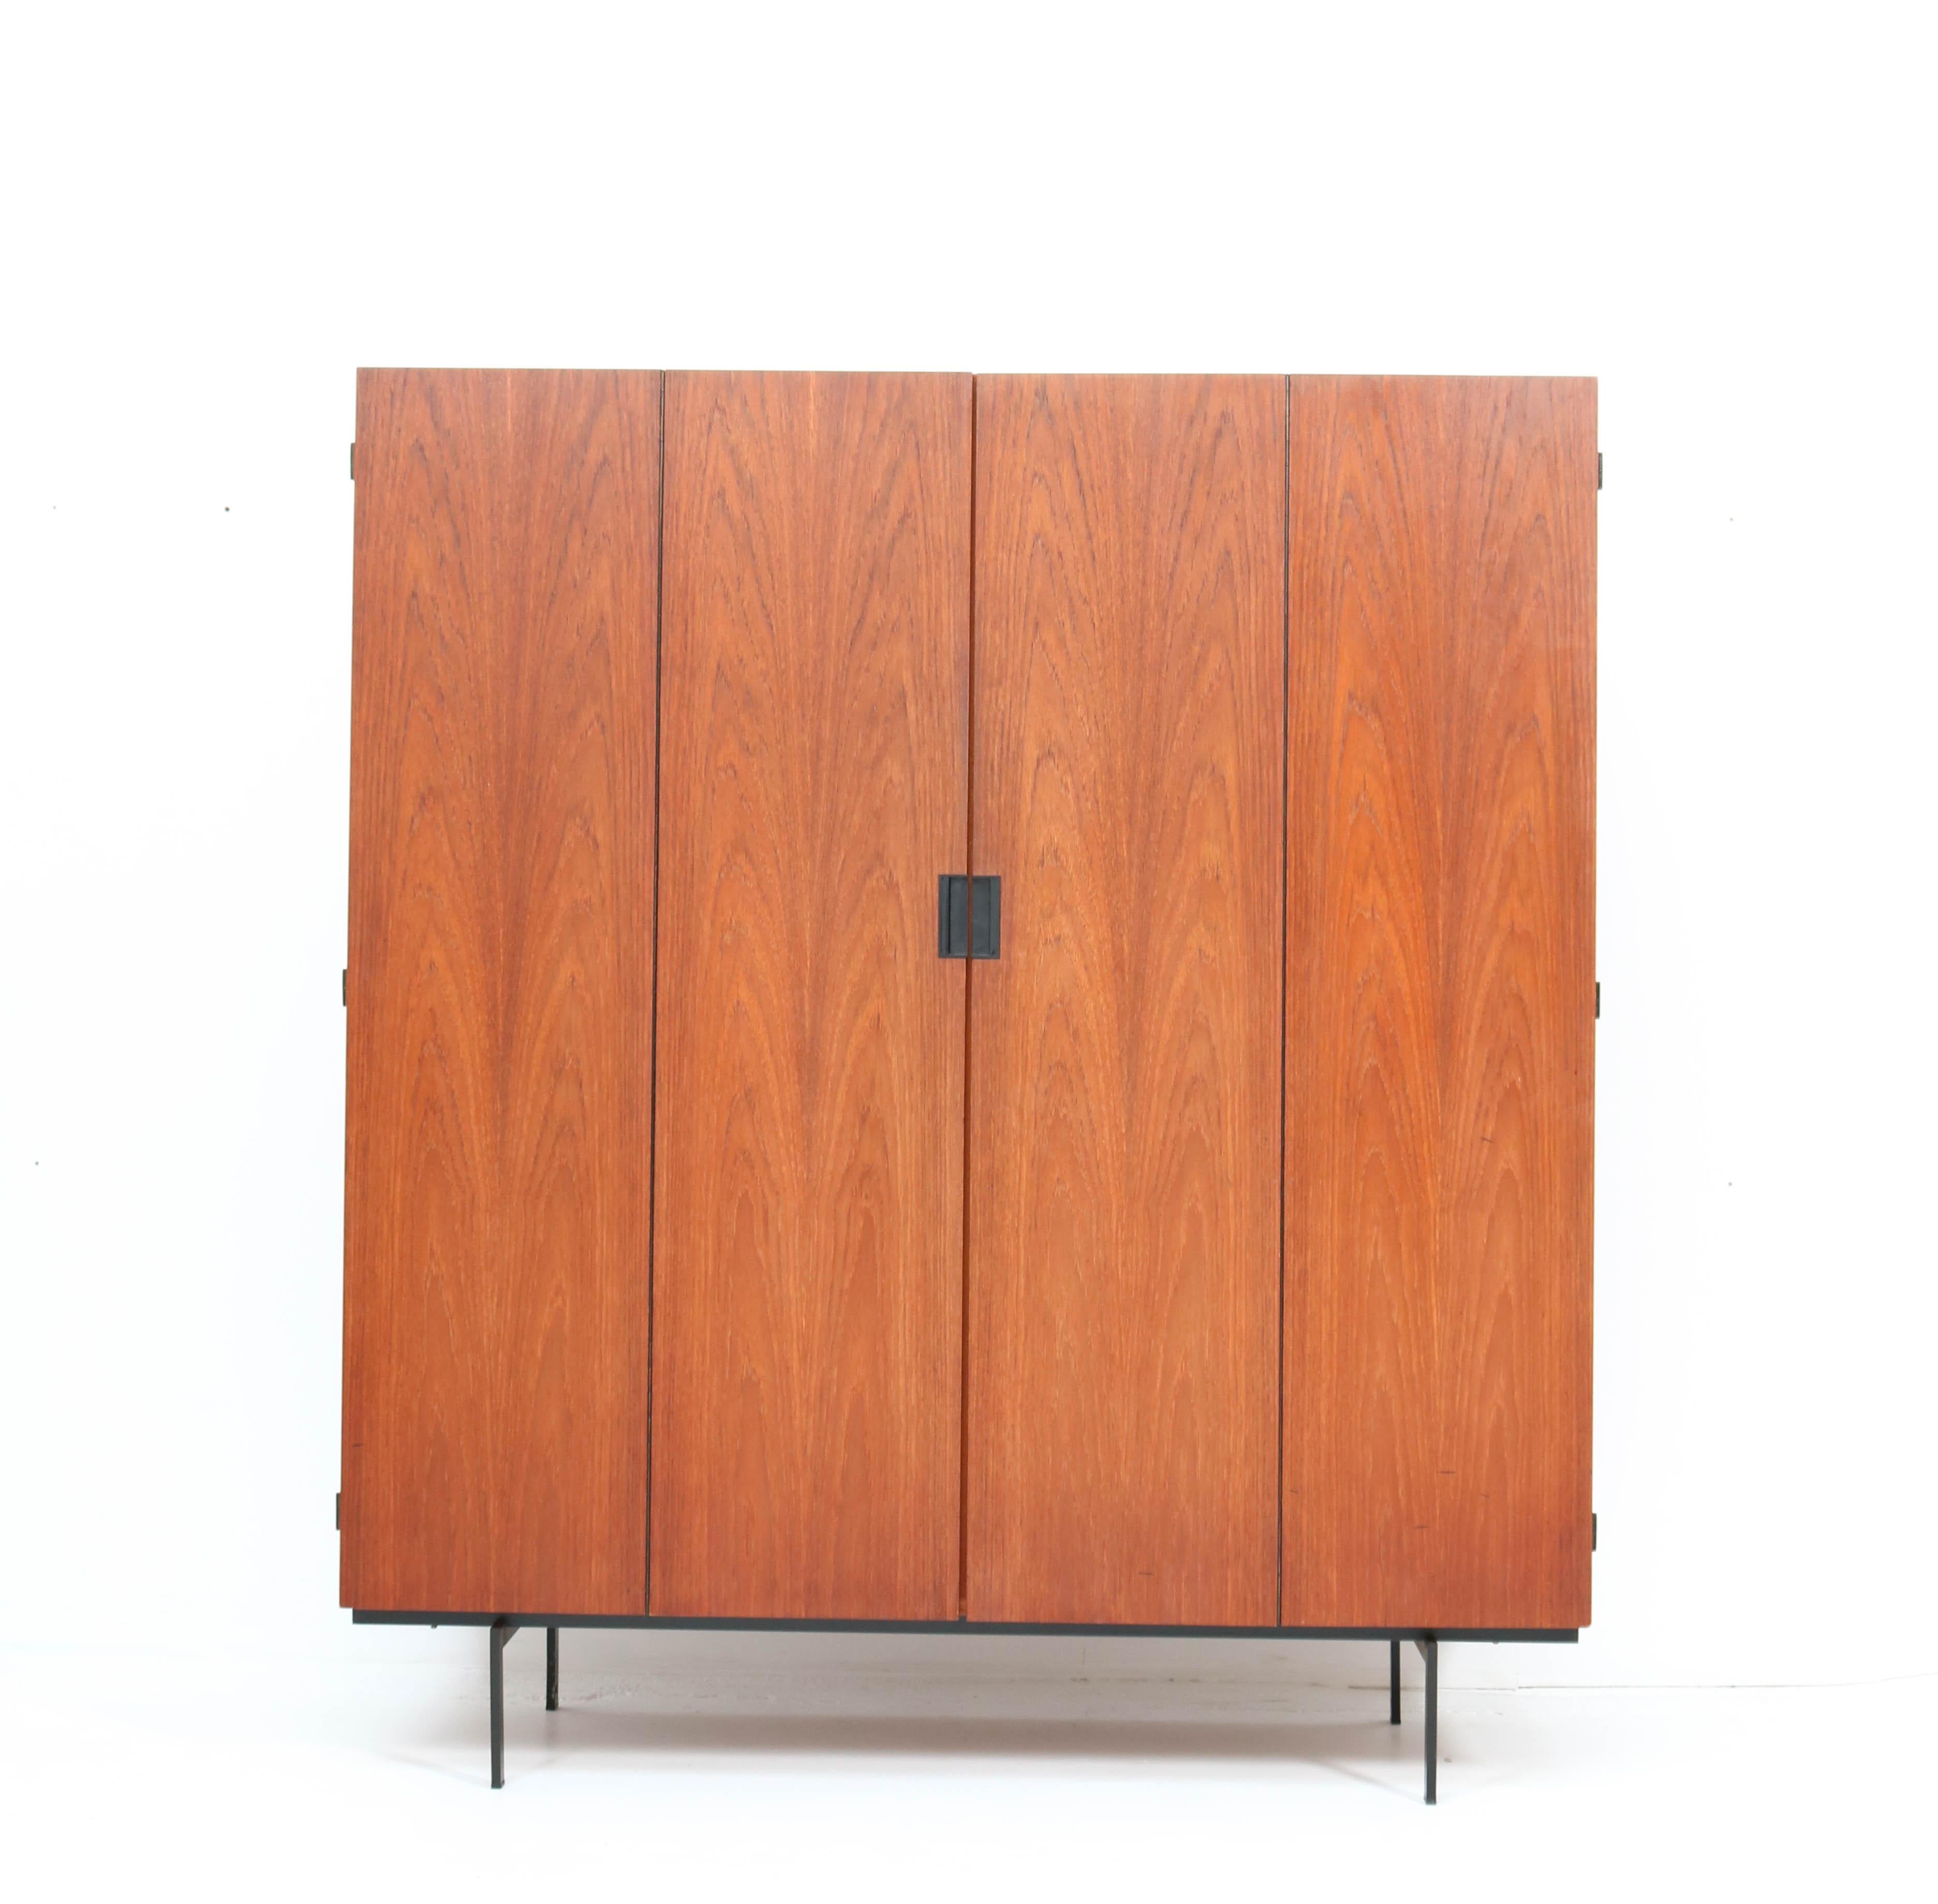 Magnificent Mid-Century Modern KU14 Japanese Series armoire or wardrobe.
Design by Cees Braakman for Pastoe.
Striking Dutch design from the 1960s.
Original teak veneered wood on black lacquered metal feet.
This wonderful piece of furniture can